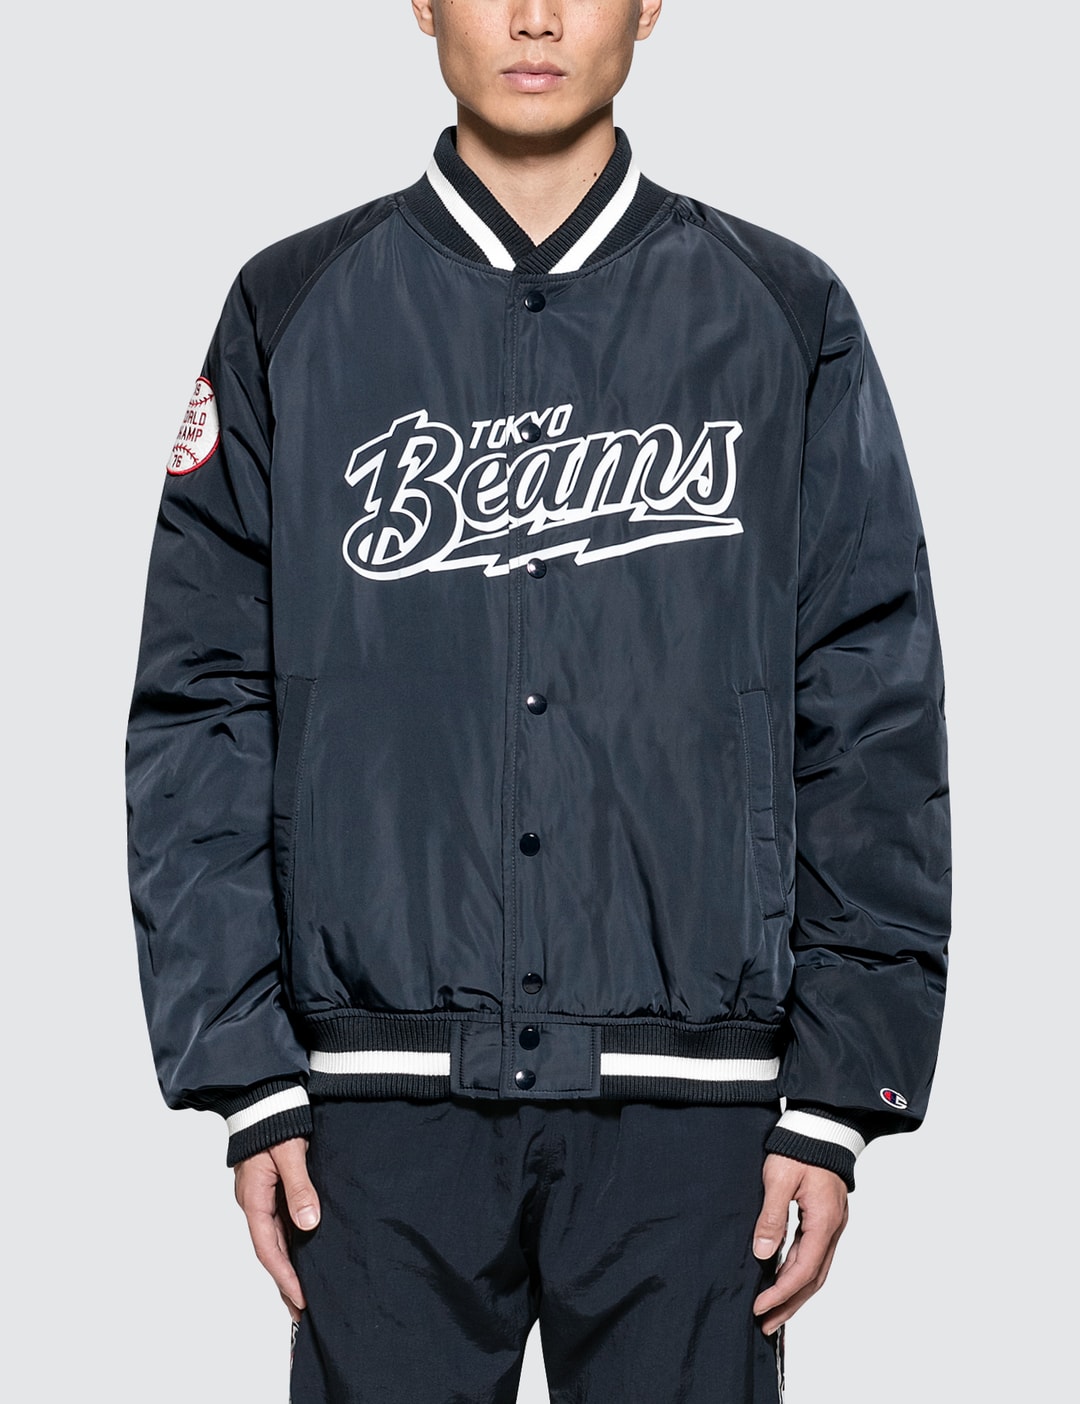 Champion Reverse Weave - Beams x Champion Bomber Jacket HBX - Curated Fashion and Lifestyle by Hypebeast